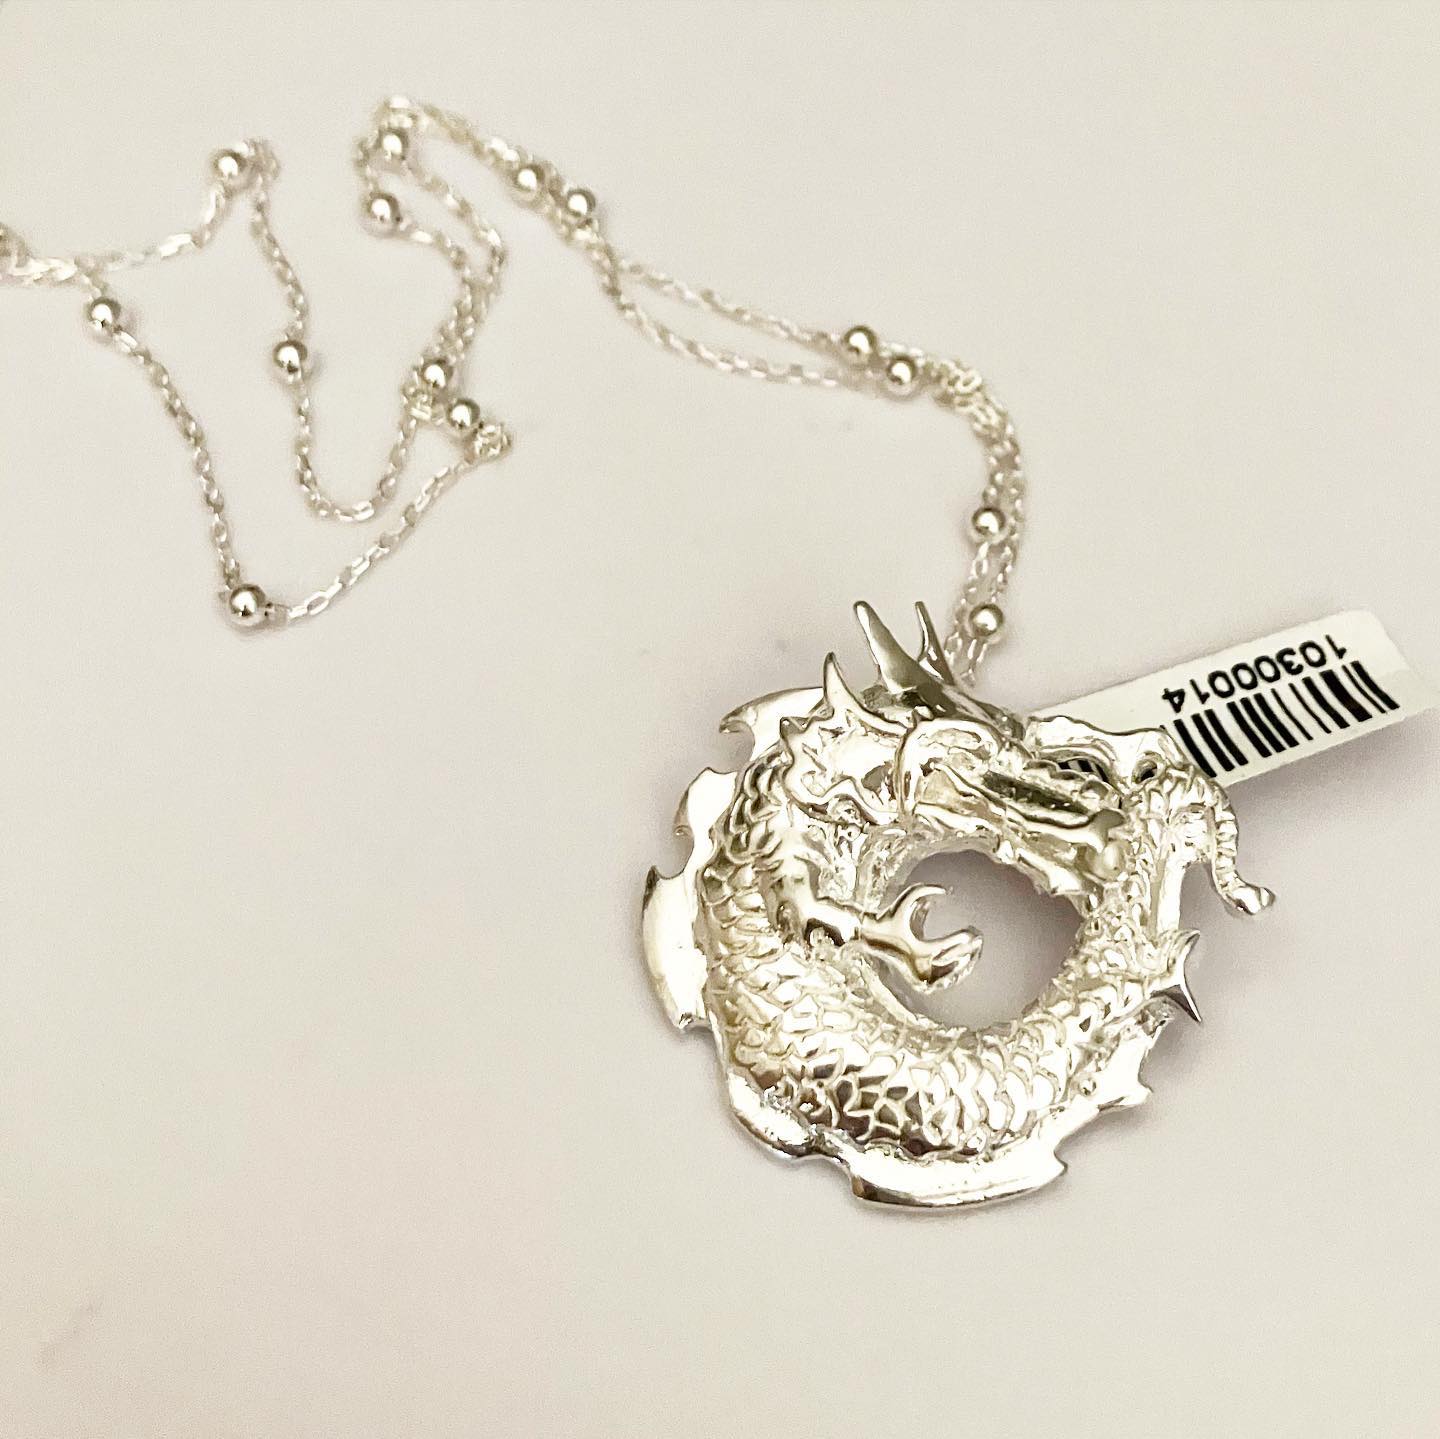 Pendant made of silver.